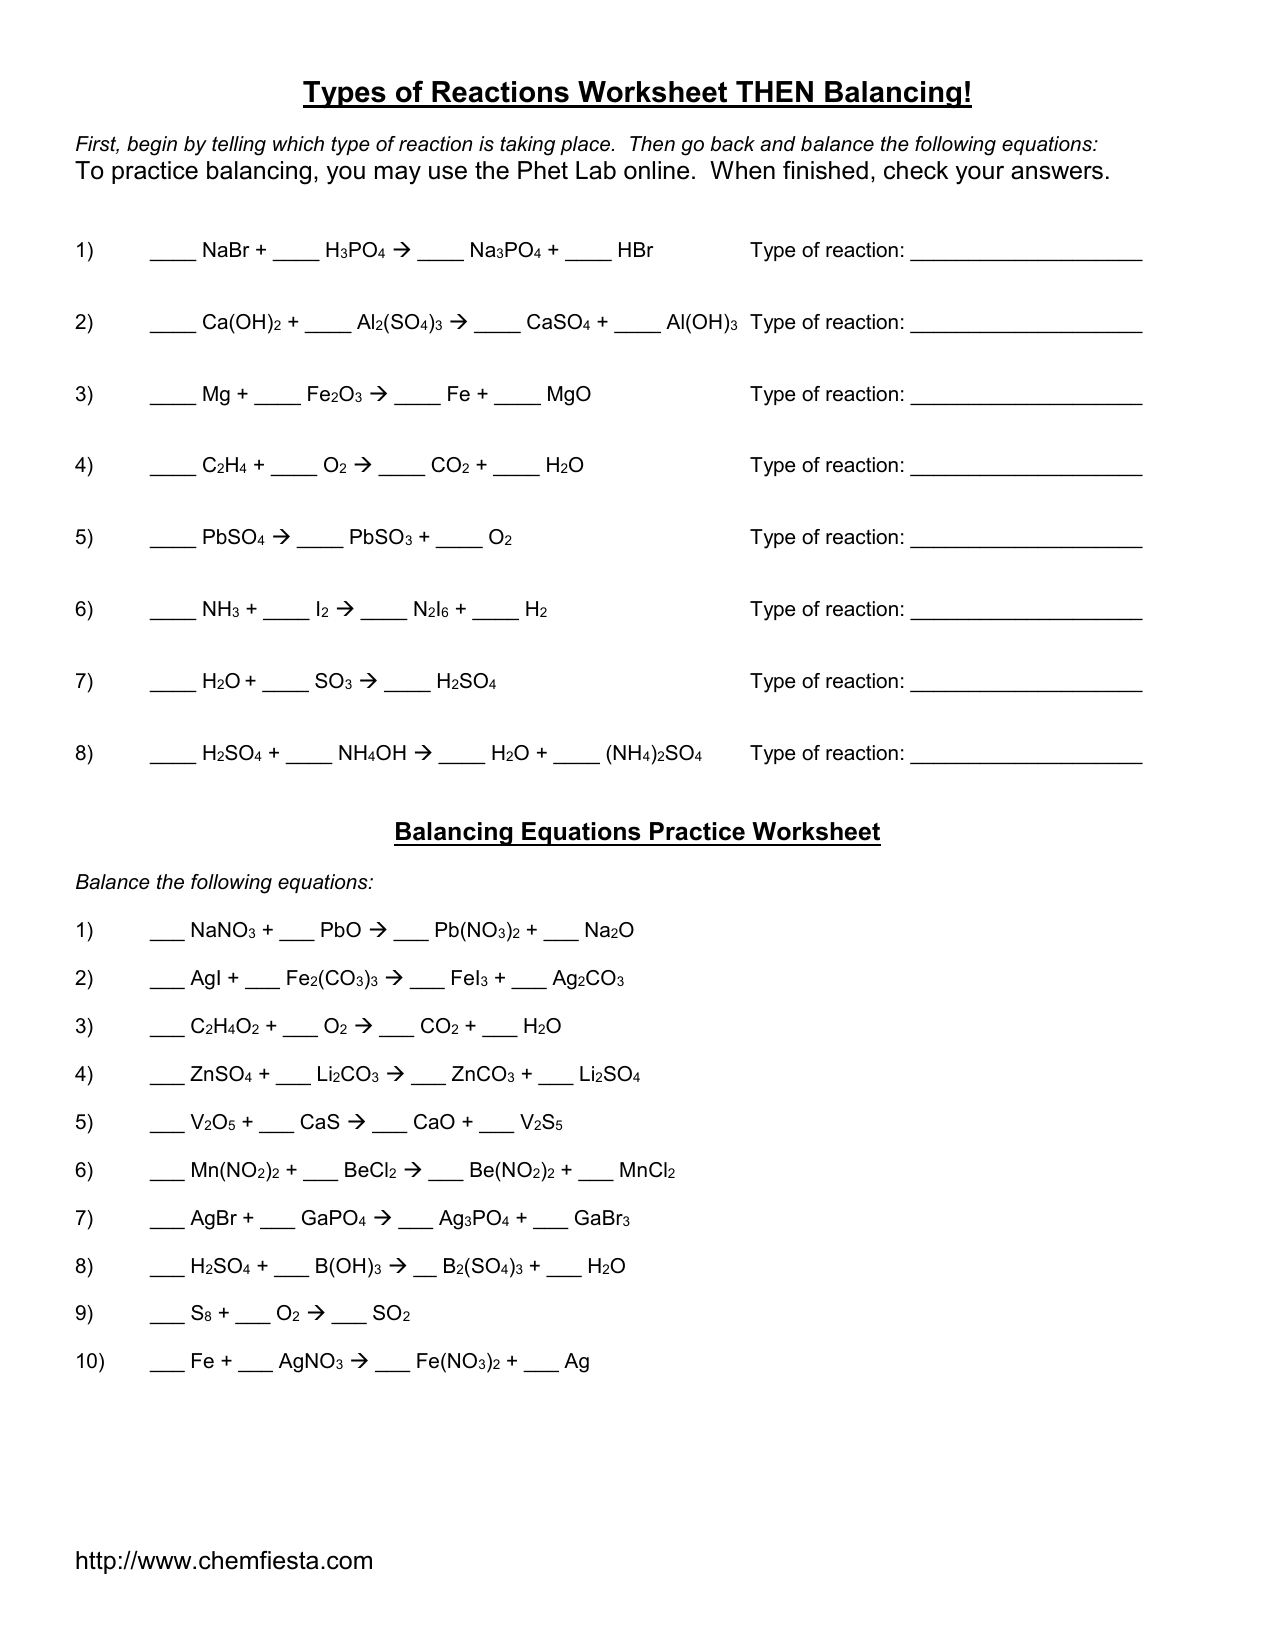 Balancing Equations Practice Worksheet - Chemistry Intended For Types Of Chemical Reactions Worksheet